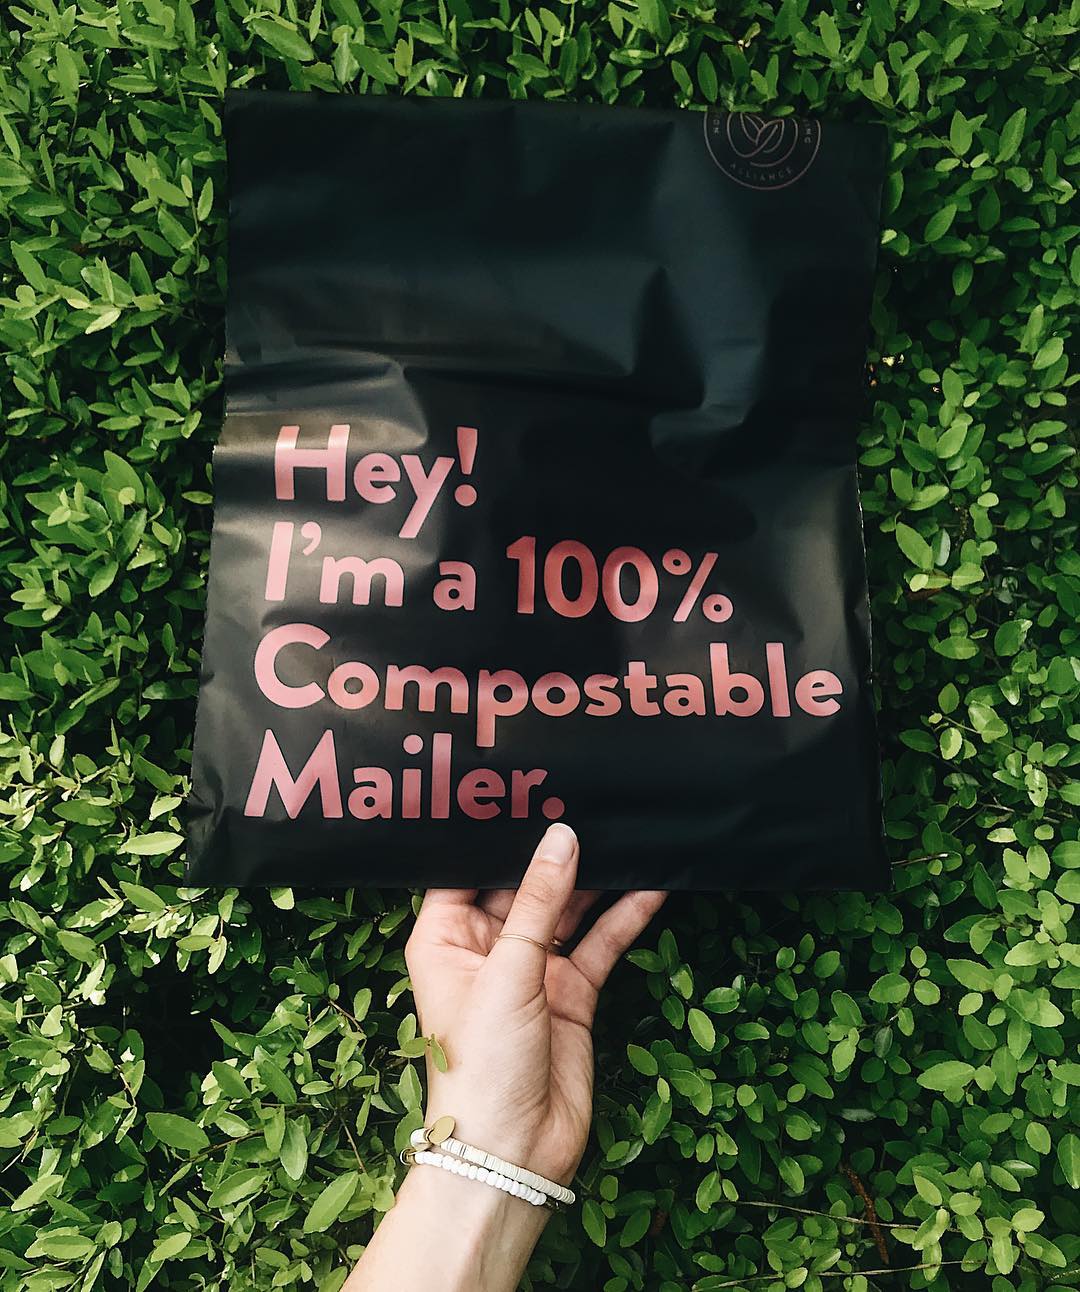 How sustainable packaging helps reduce the world’s plastic problem